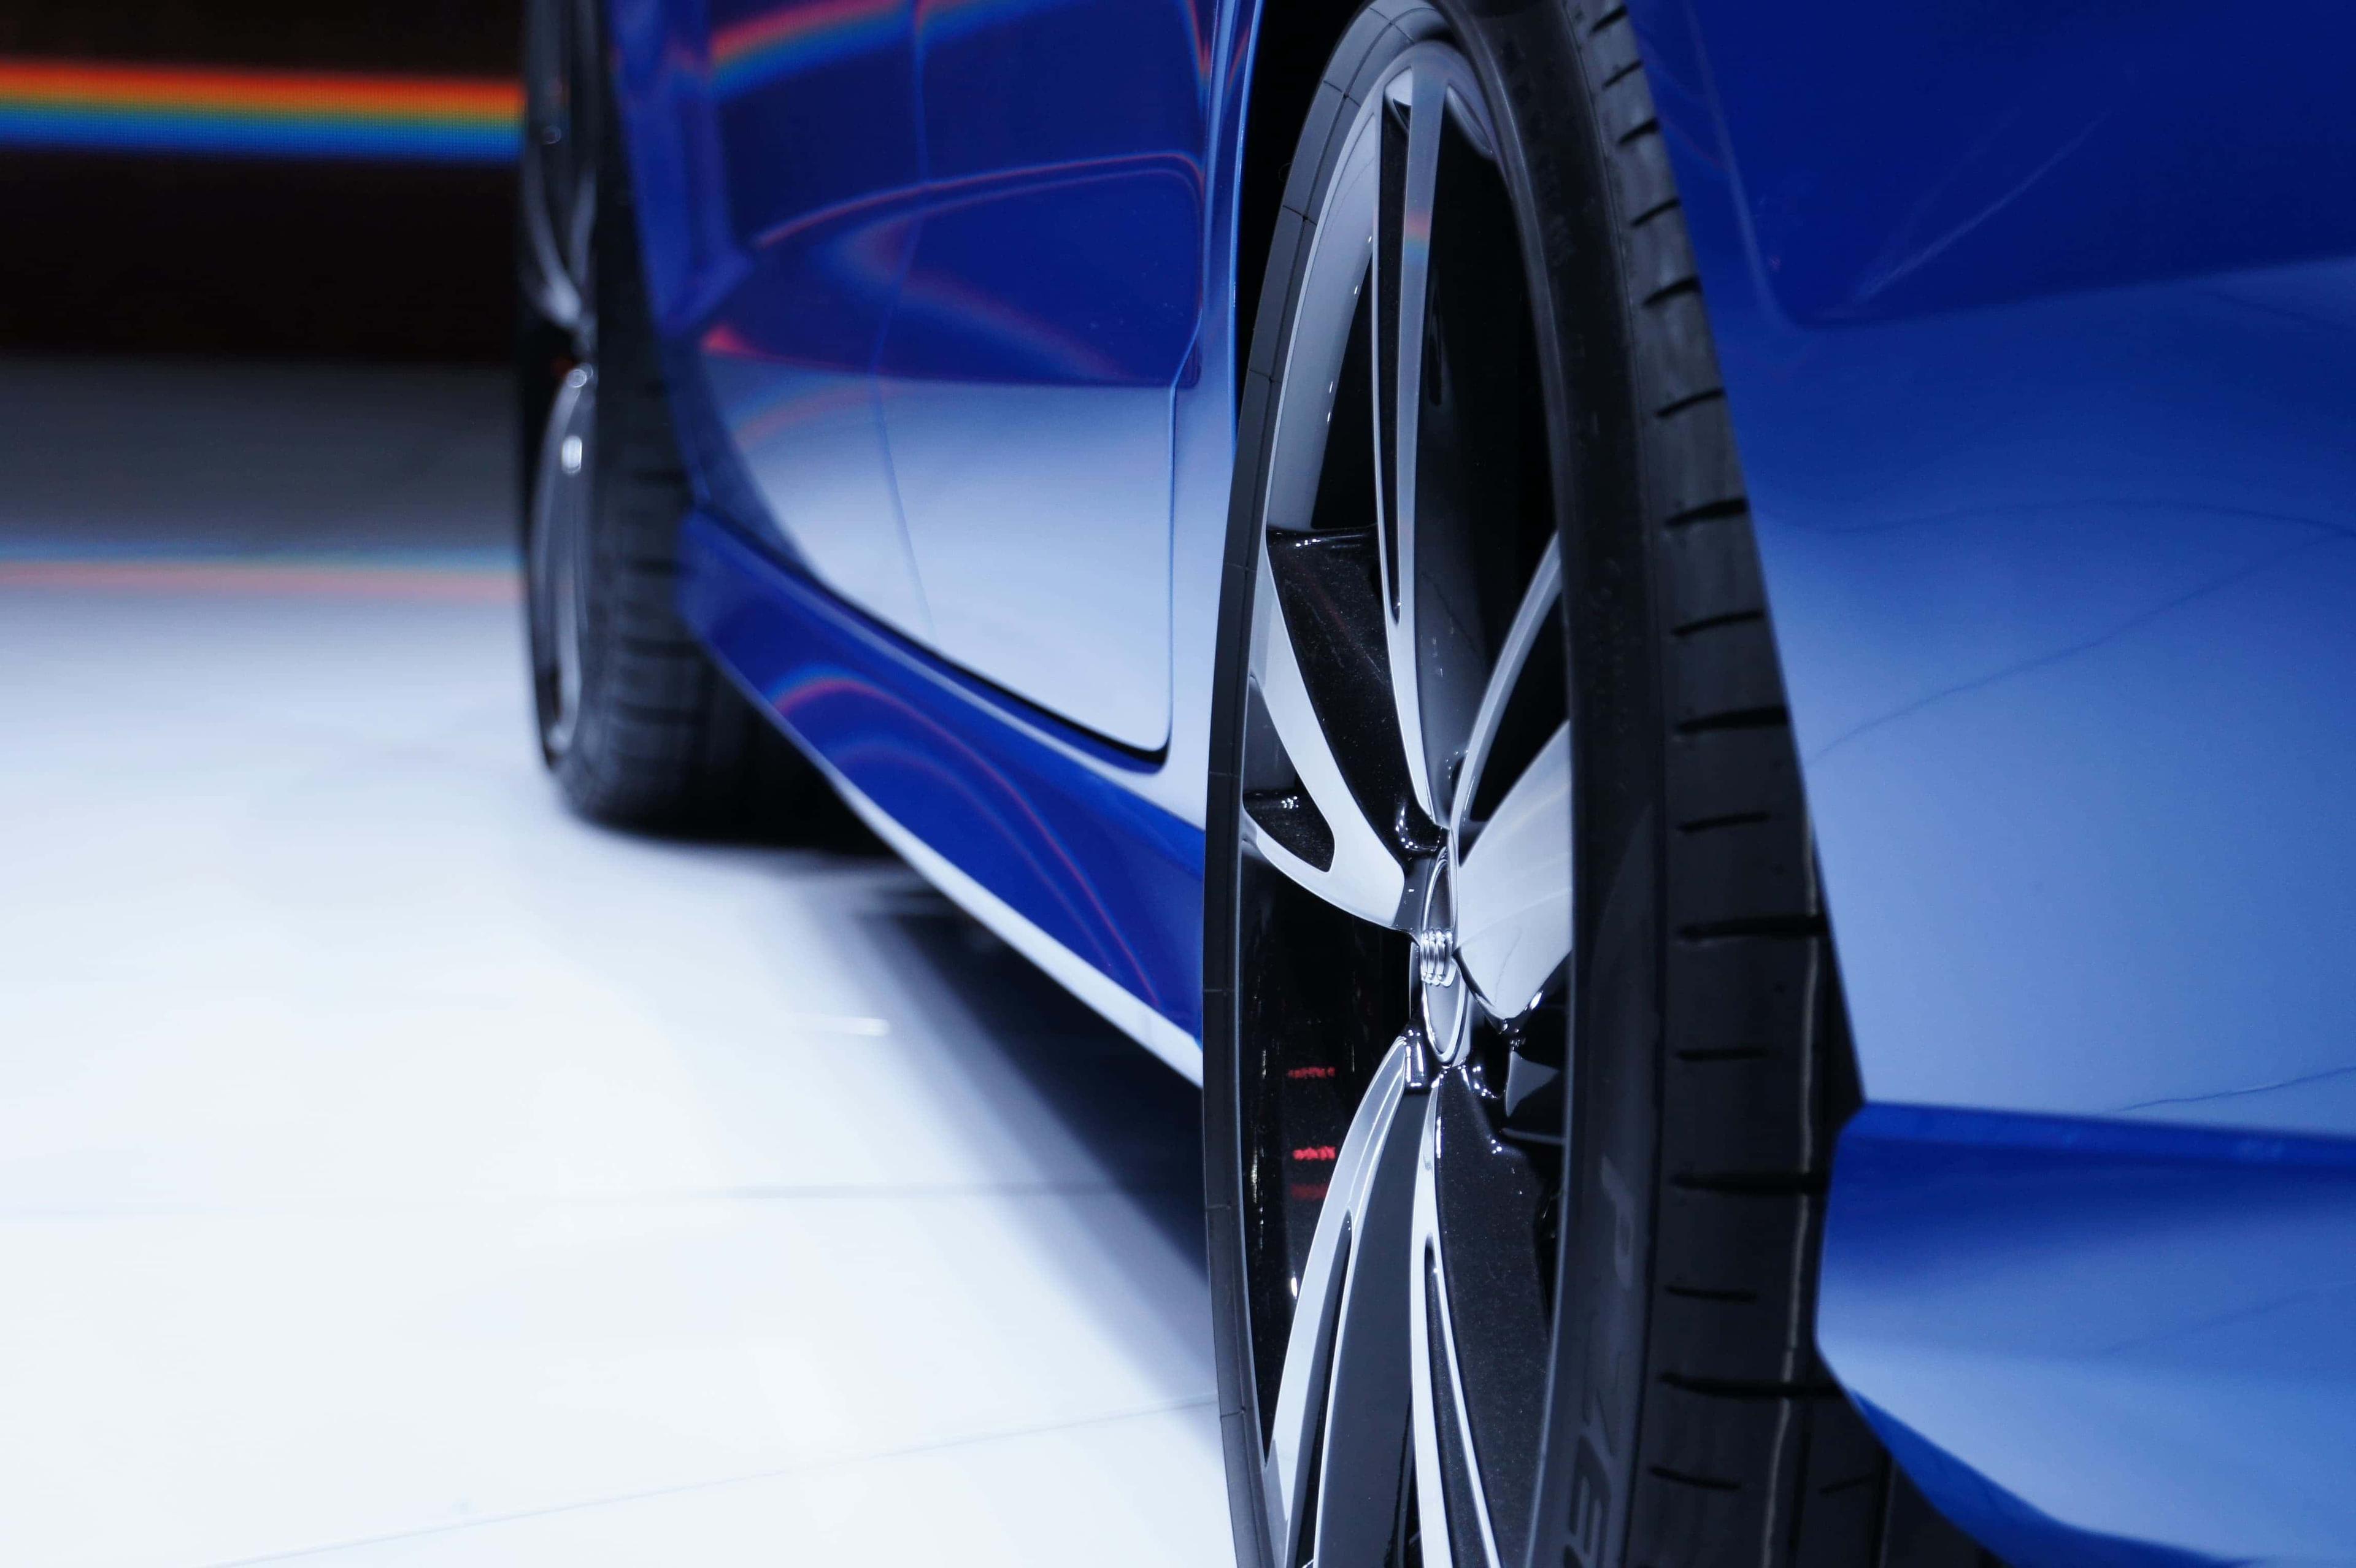 Image of a blue car, focusing on the wheel